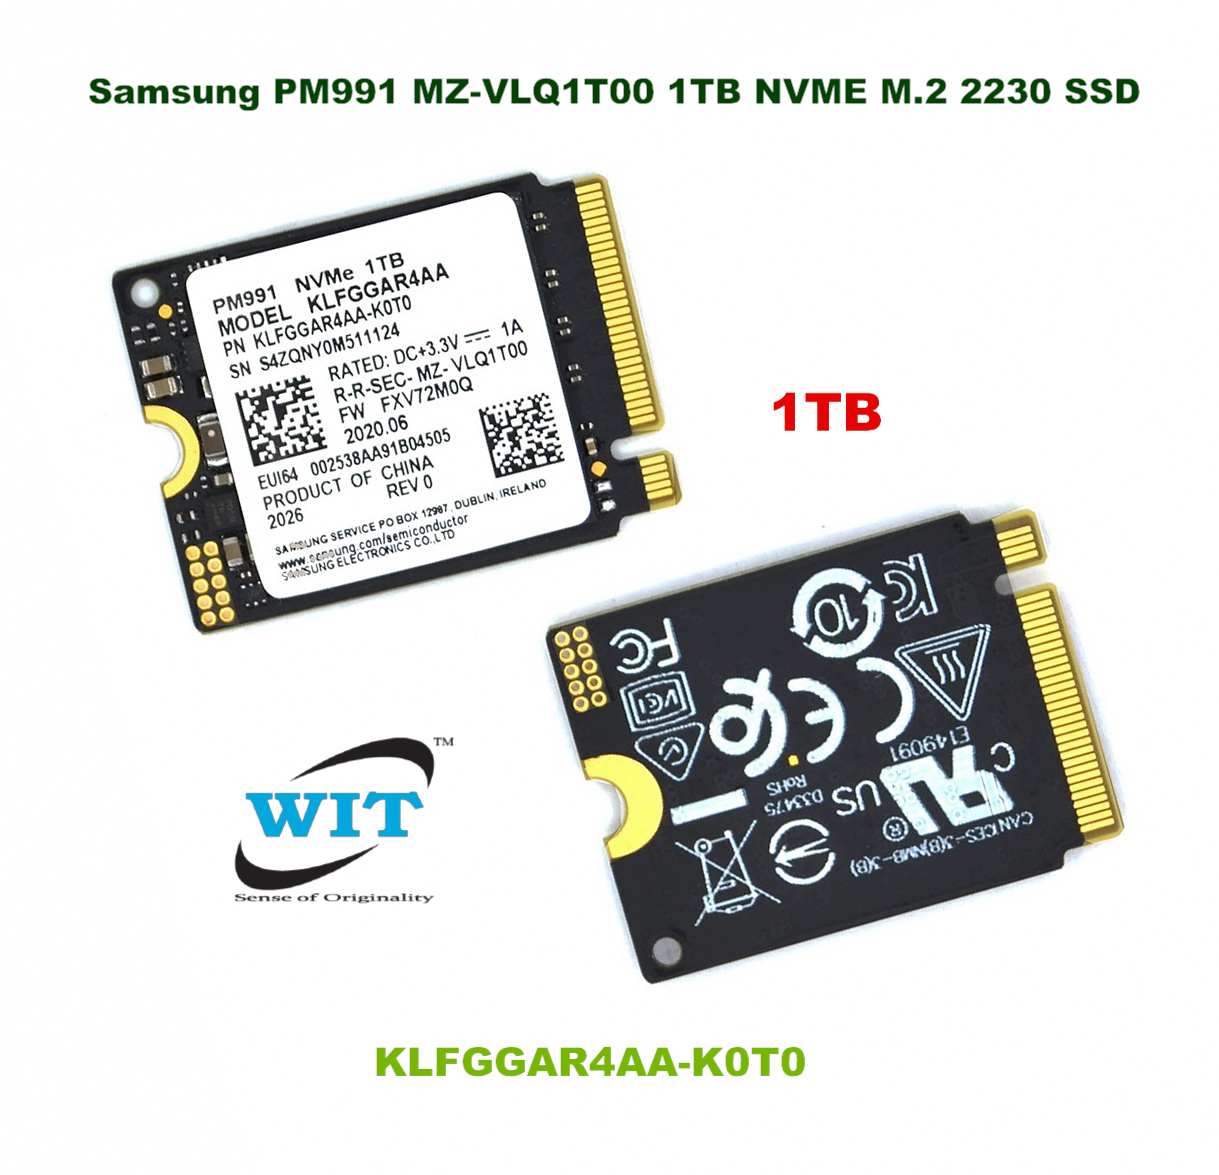 embargo handicappet omhyggelig 1TB M.2 2230 NVMe PCI Express 3.0 x2 SSD (Solid State Drive)-30mm Half  Size, Brand : Samsung PM991 MZ-VLQ1T00, KLFGGAR4AA-K0T0 For Microsoft  Surface Pro X, Microsoft Surface Pro 7+, Microsoft Surface Laptop